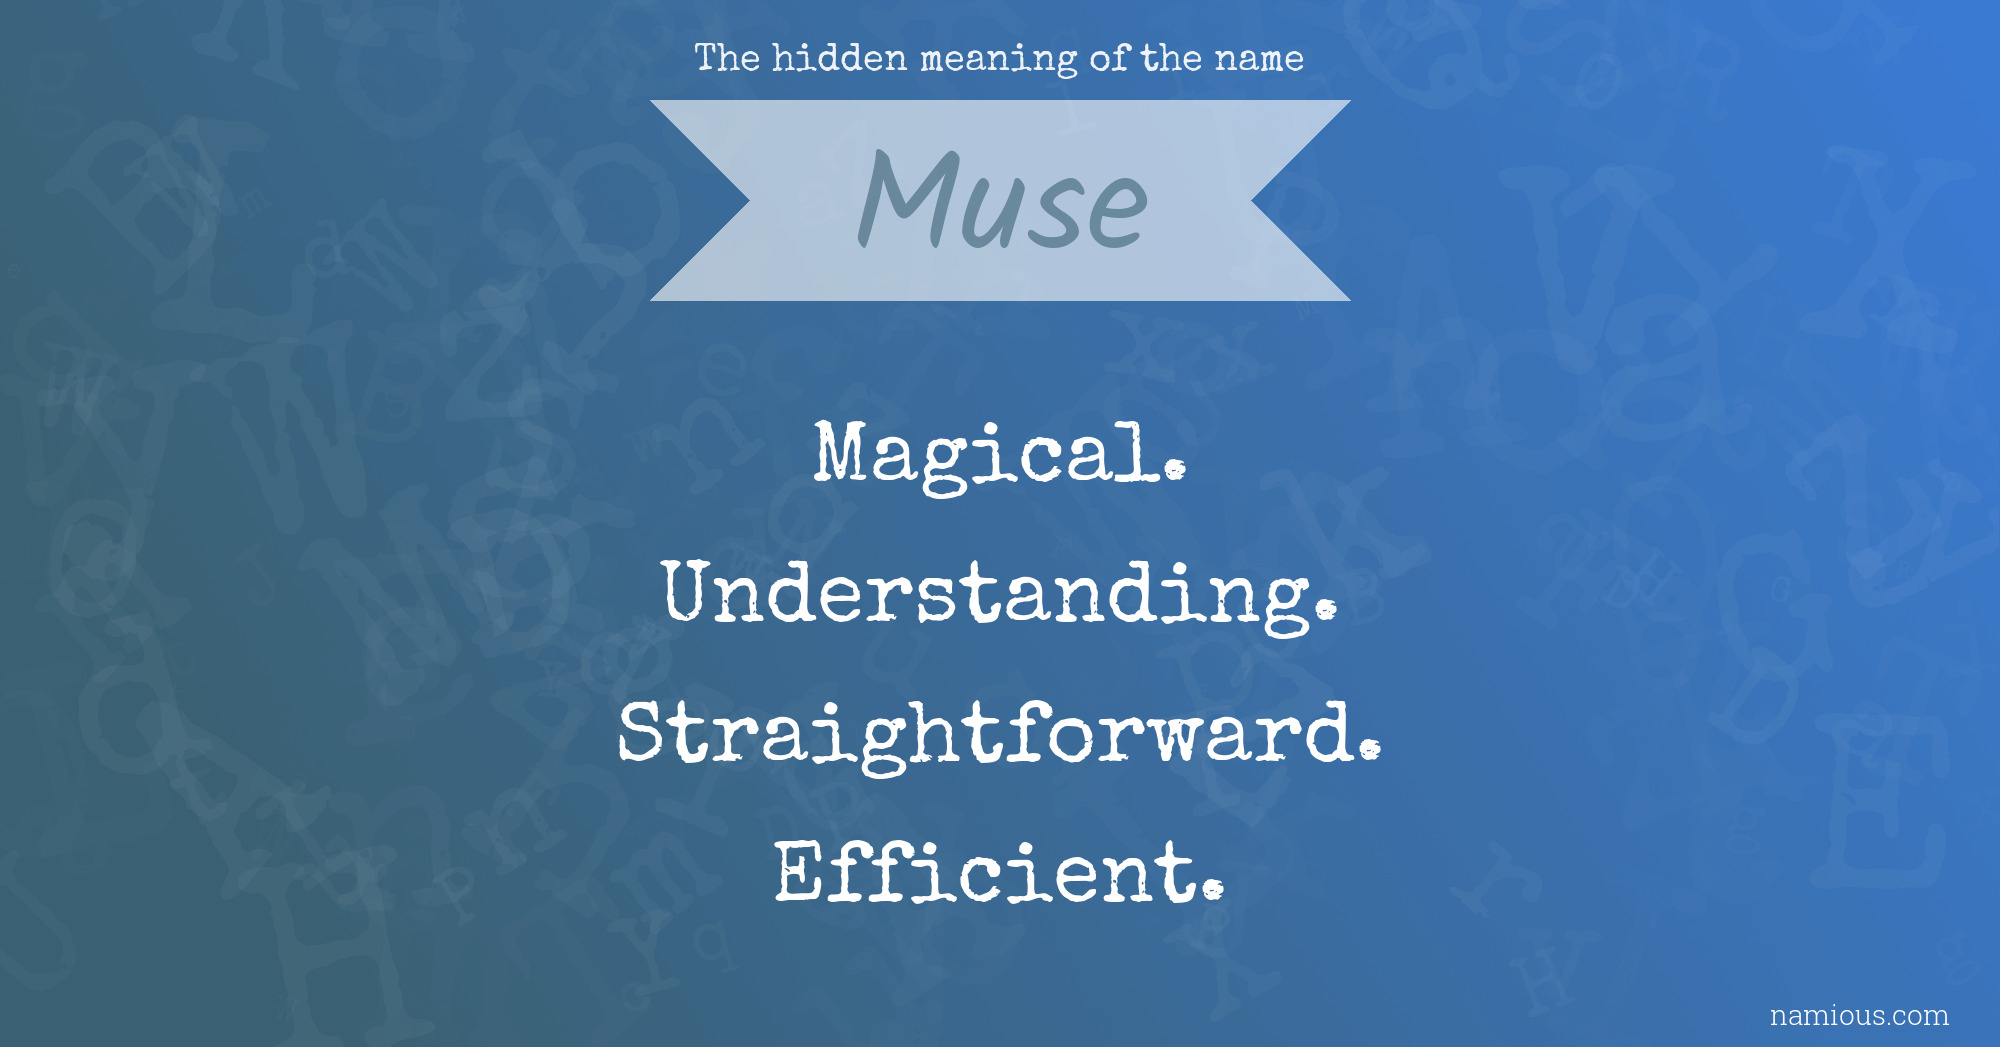 The hidden meaning of the name Muse